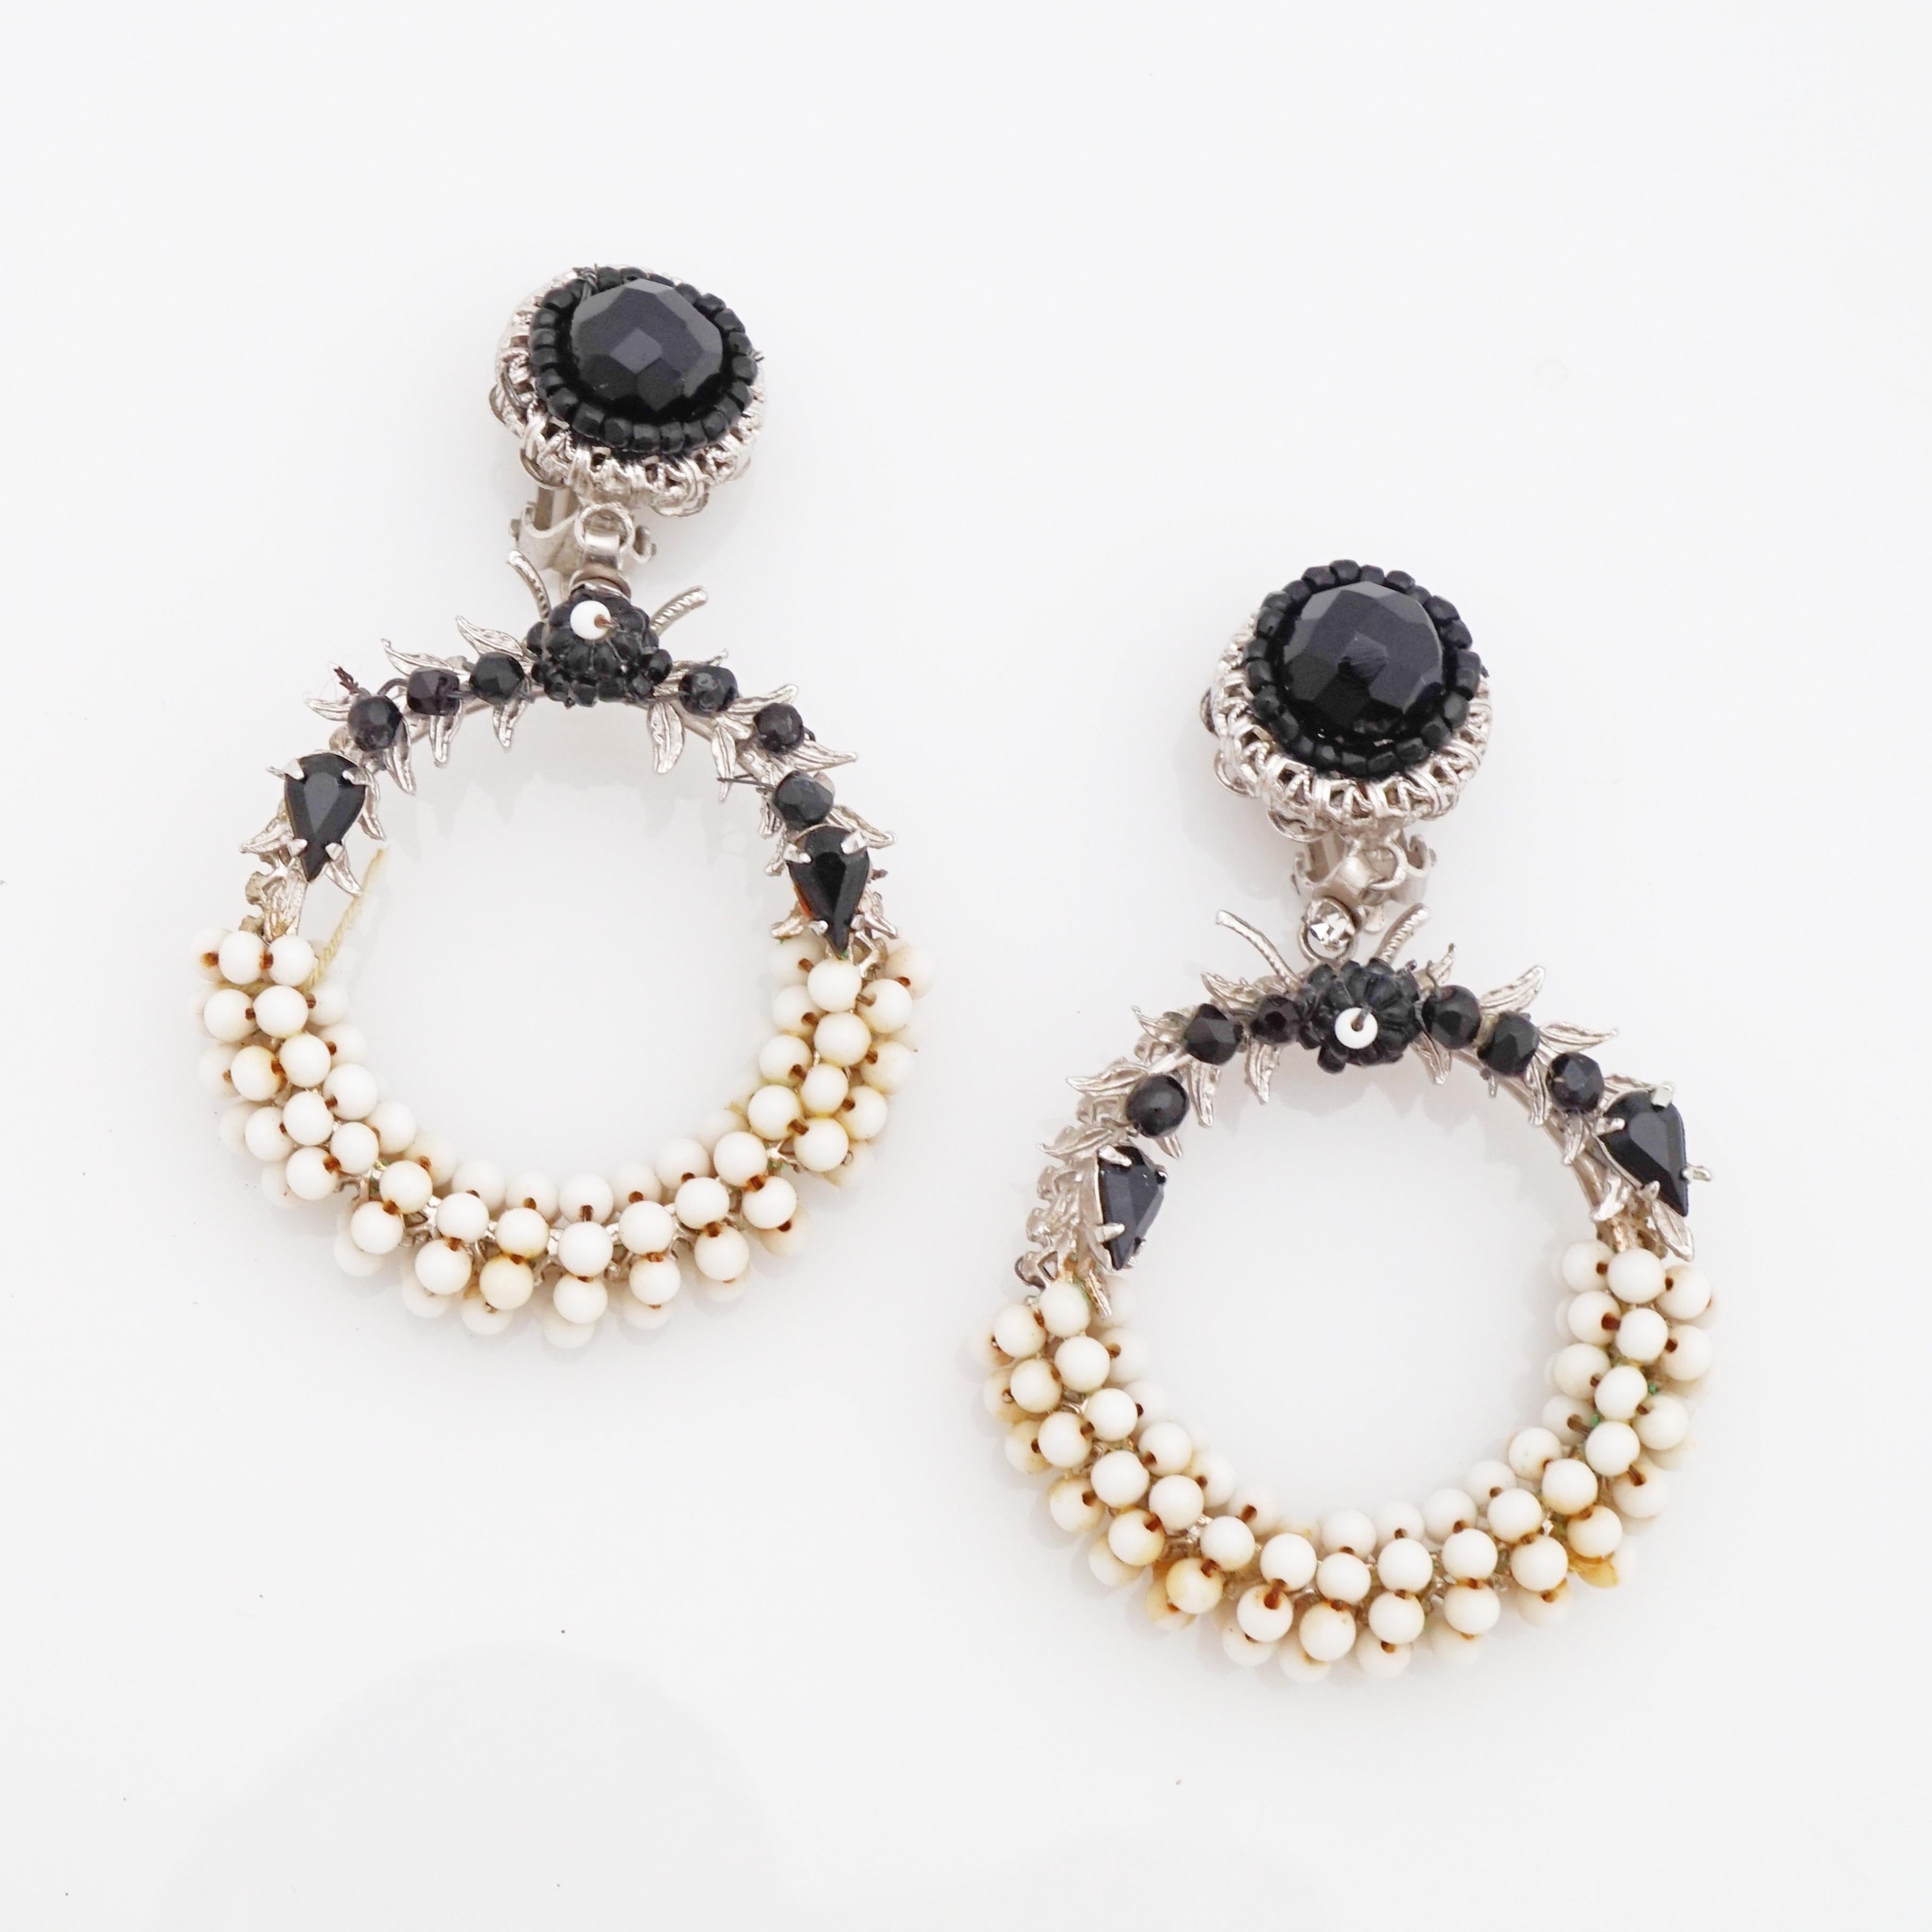 - Vintage item

- Collectible costume jewelry piece from the mid-century

- Each earring measures 2.8